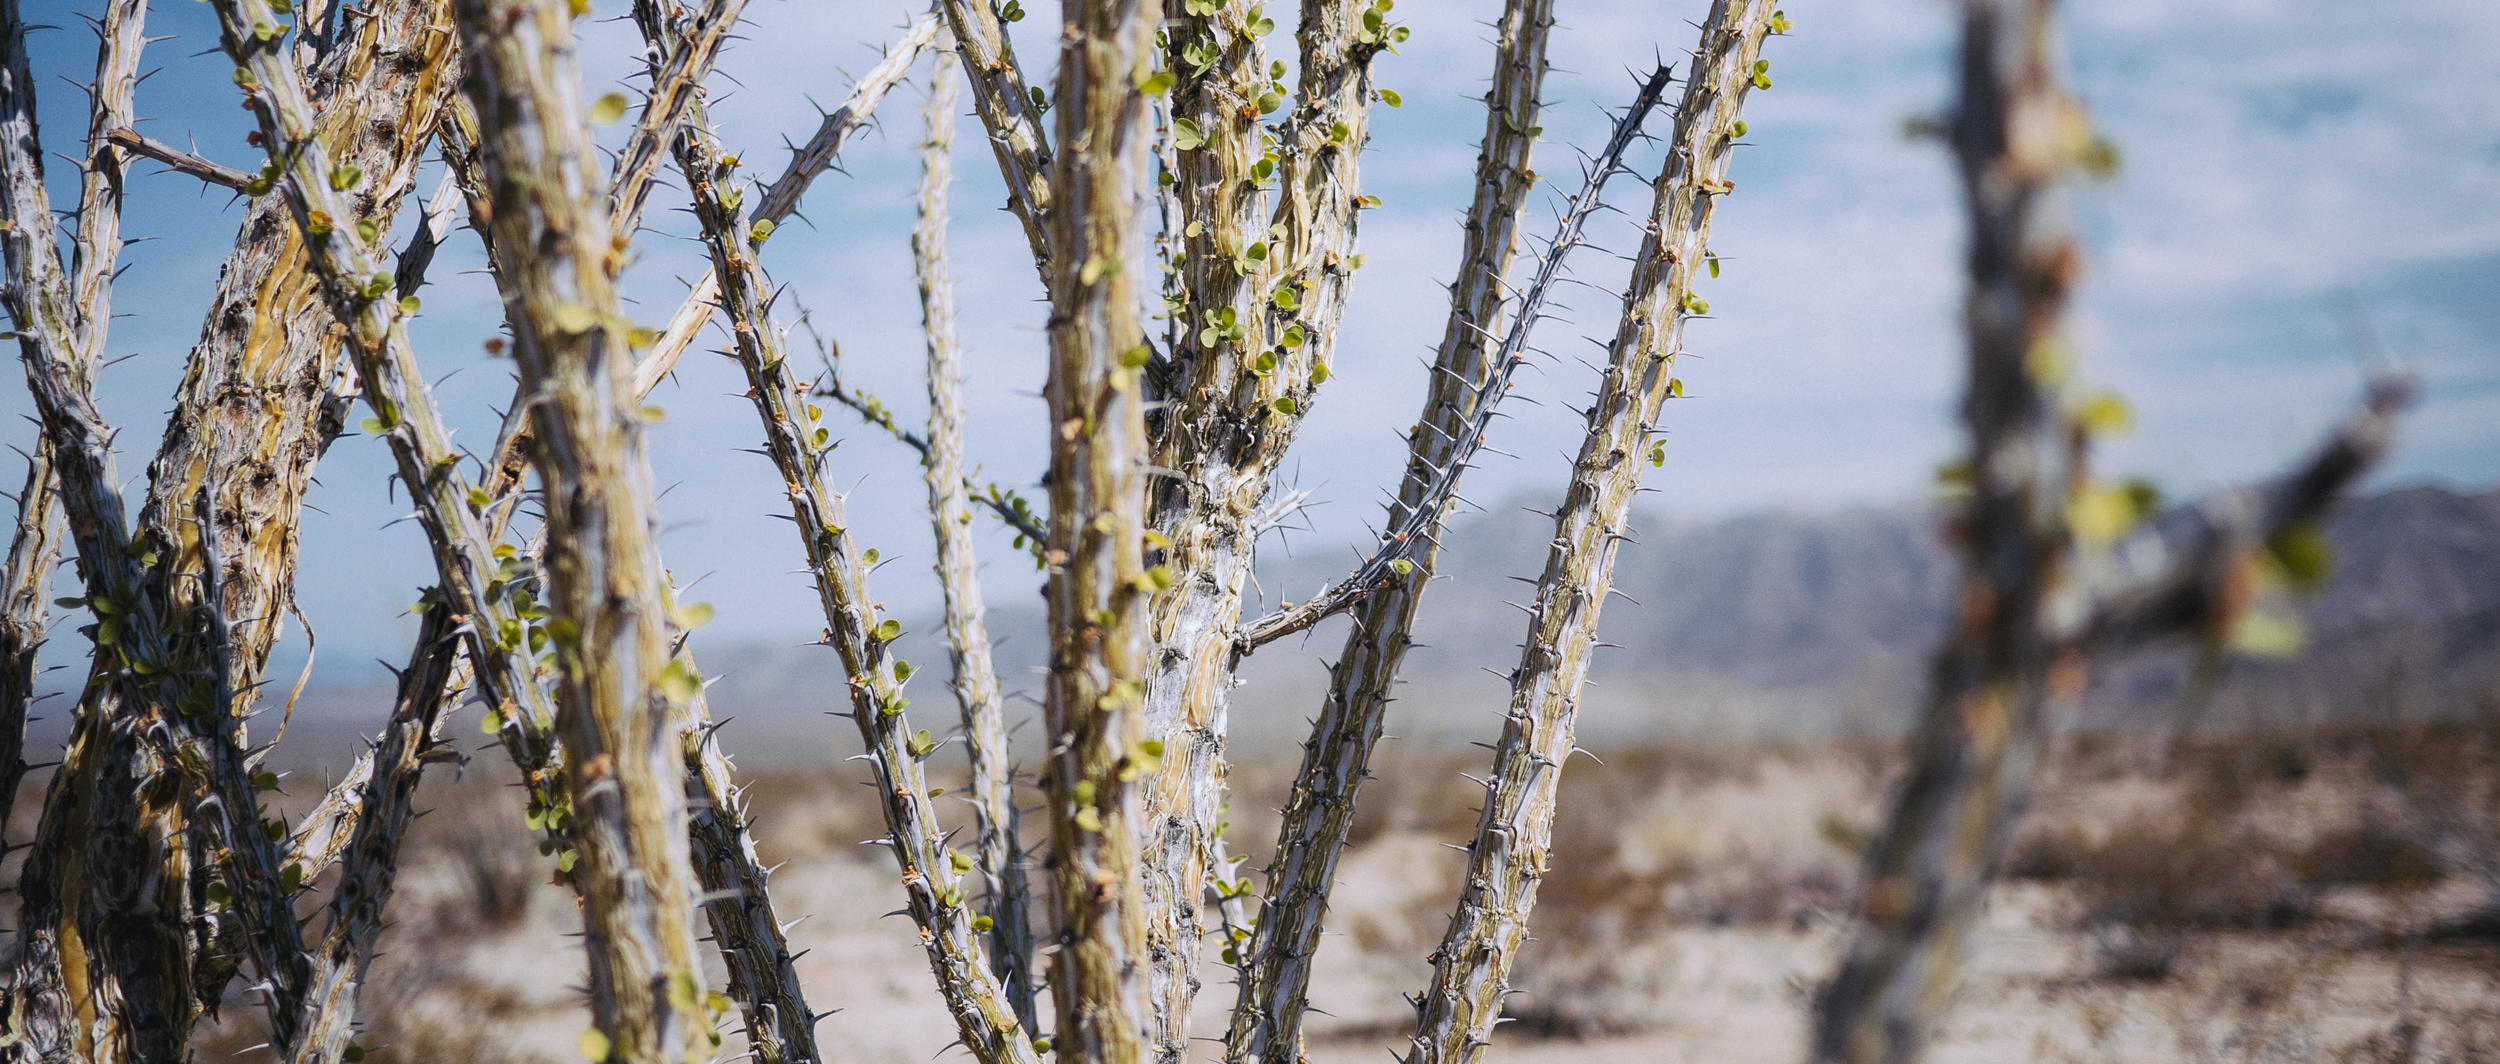 An Ocotillo in the Ocotillo Patch